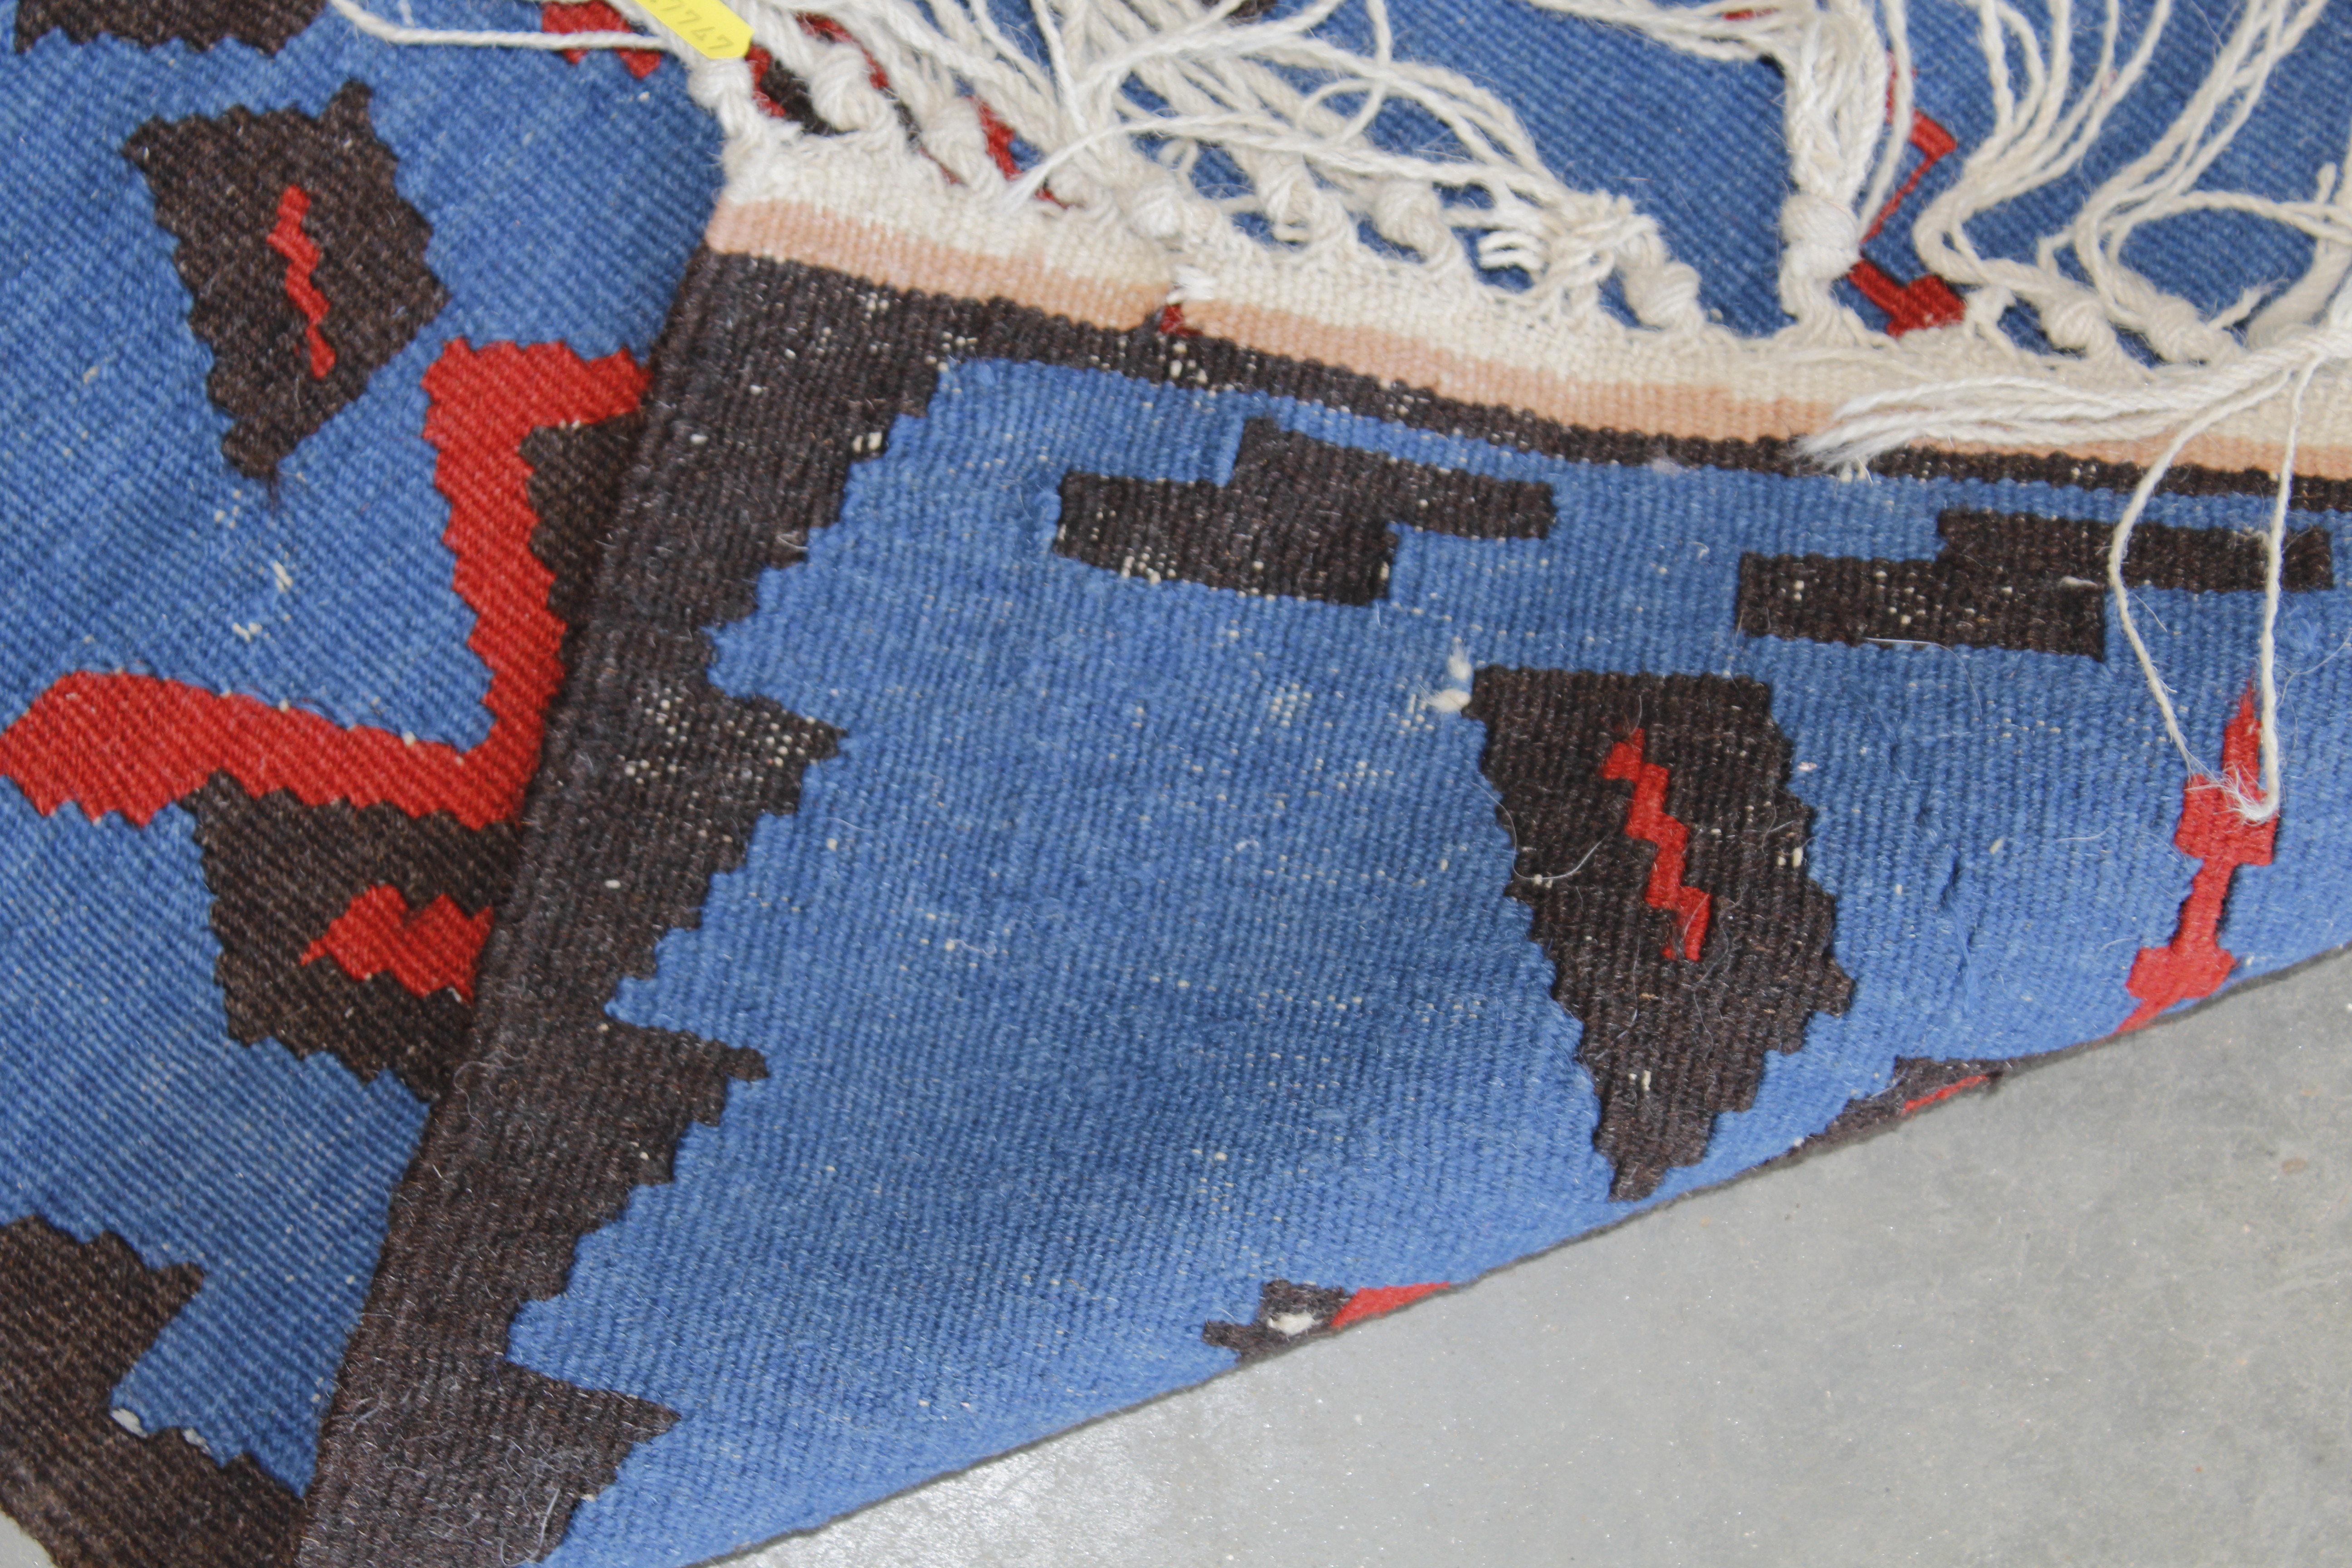 An approx. 5' x 3' Kilim rug - Image 3 of 3